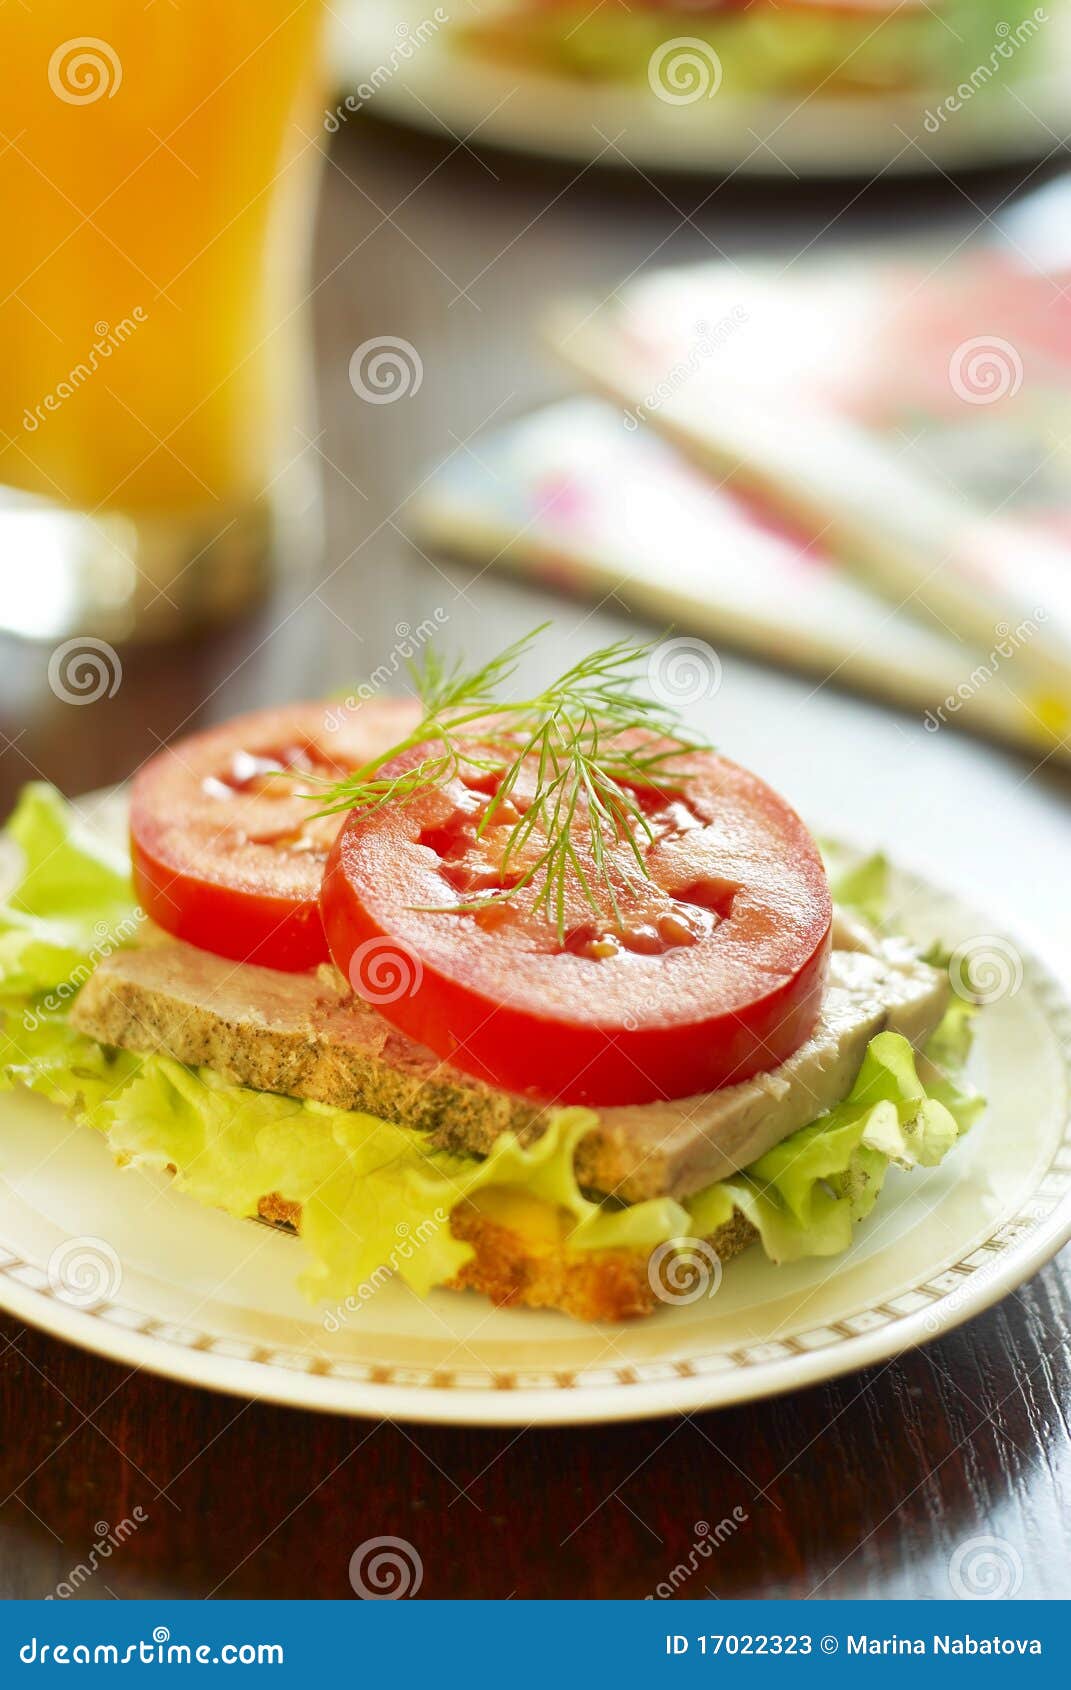 Sandwich with baked ham and vegetables. Sandwich with baked ham, lettuce and tomato